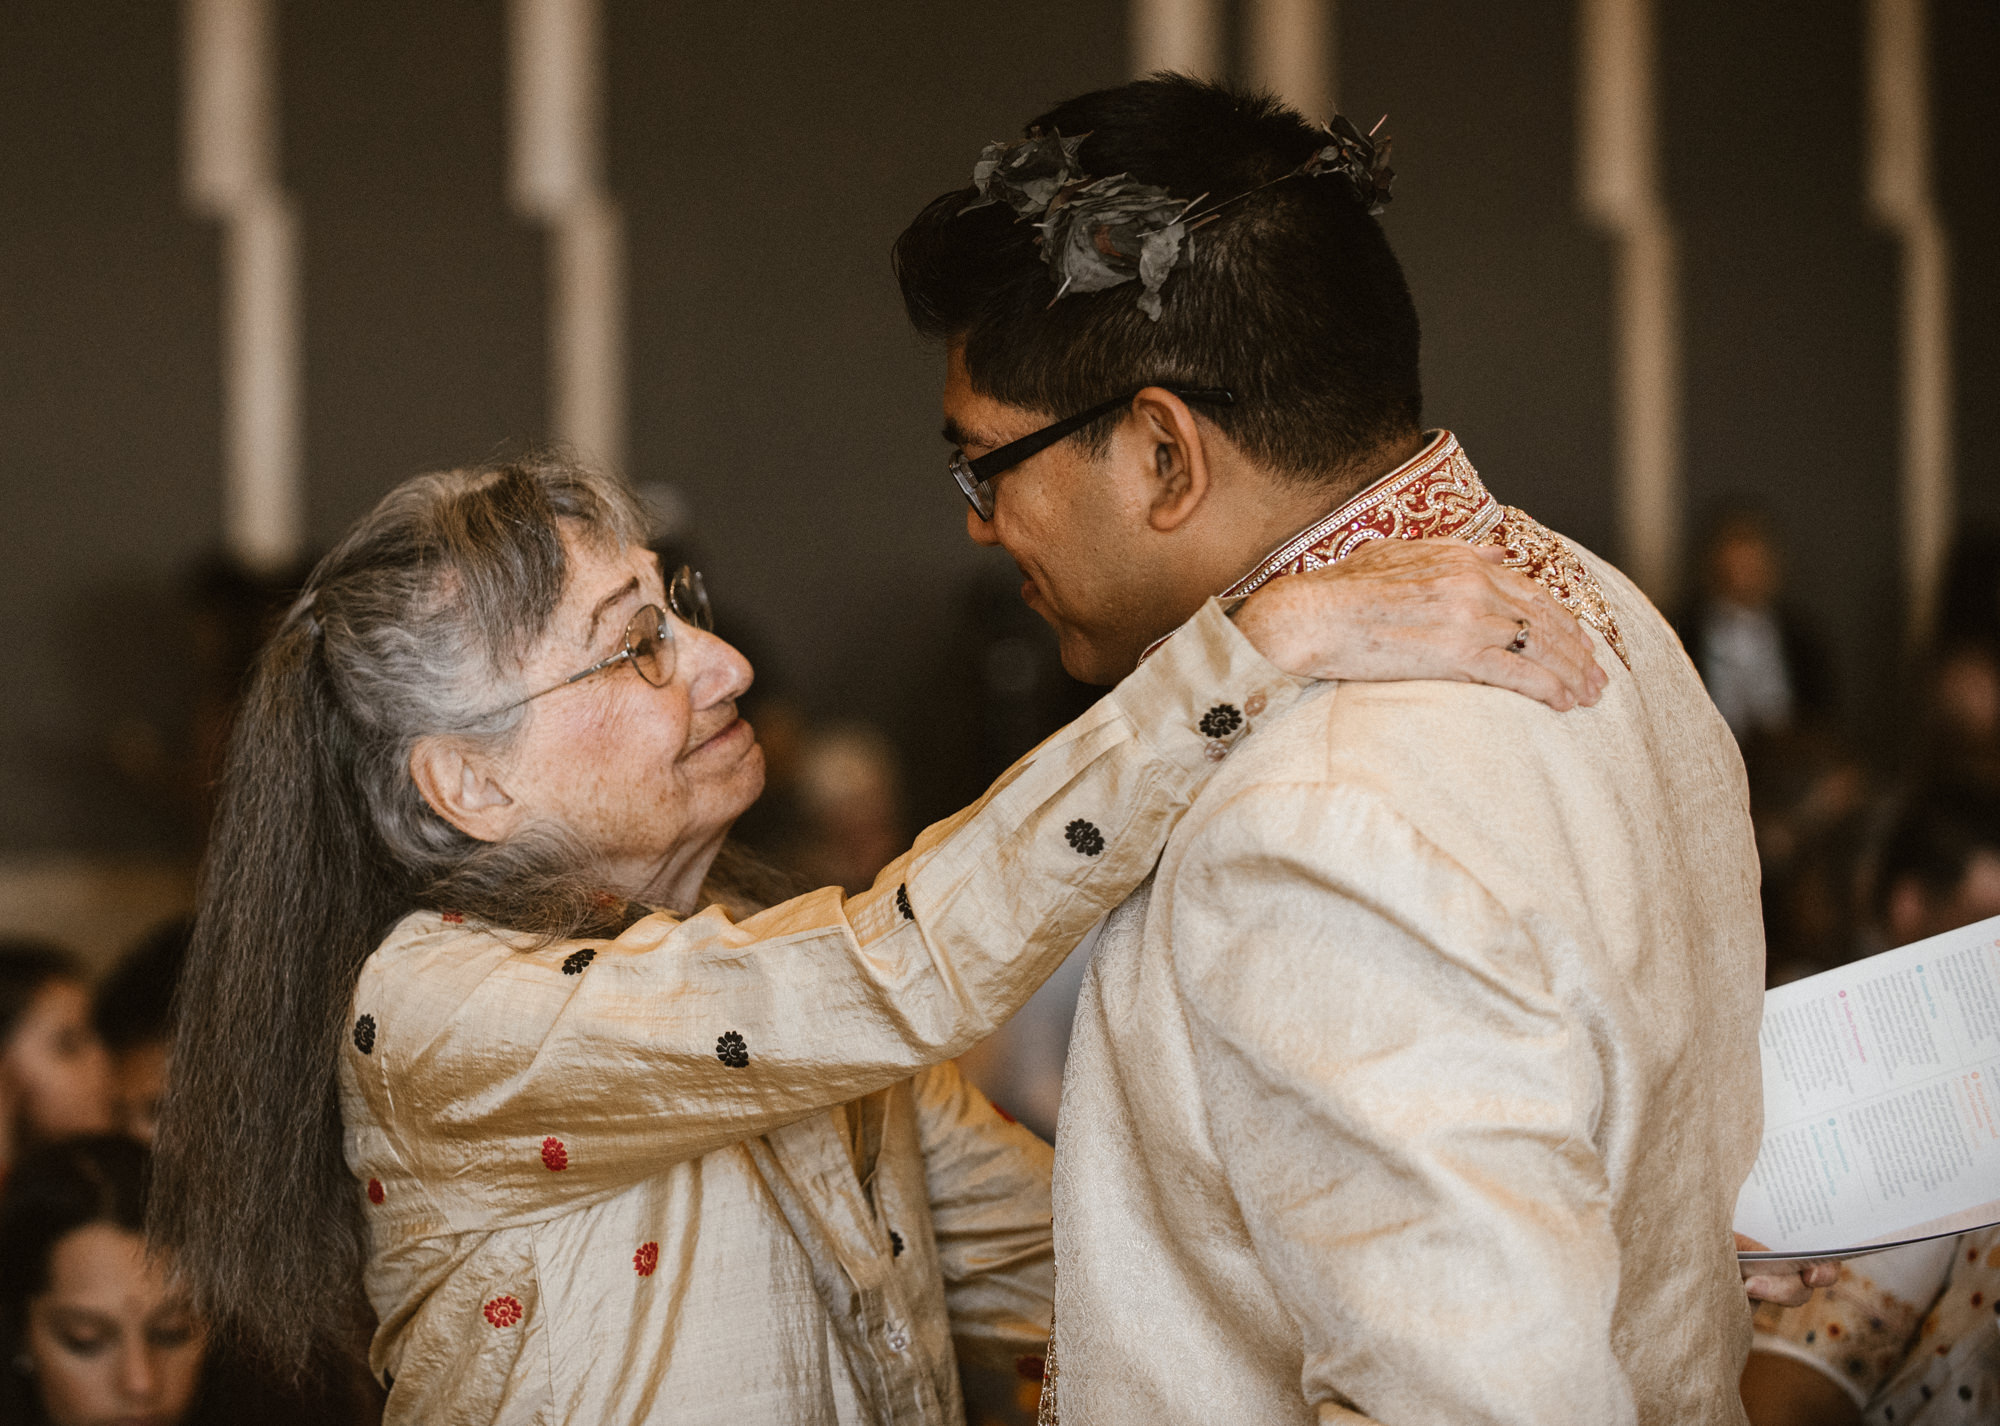 Neel getting a welcome from his aunt to his Hindu wedding at the Four Seasons Hotel, Seattle.